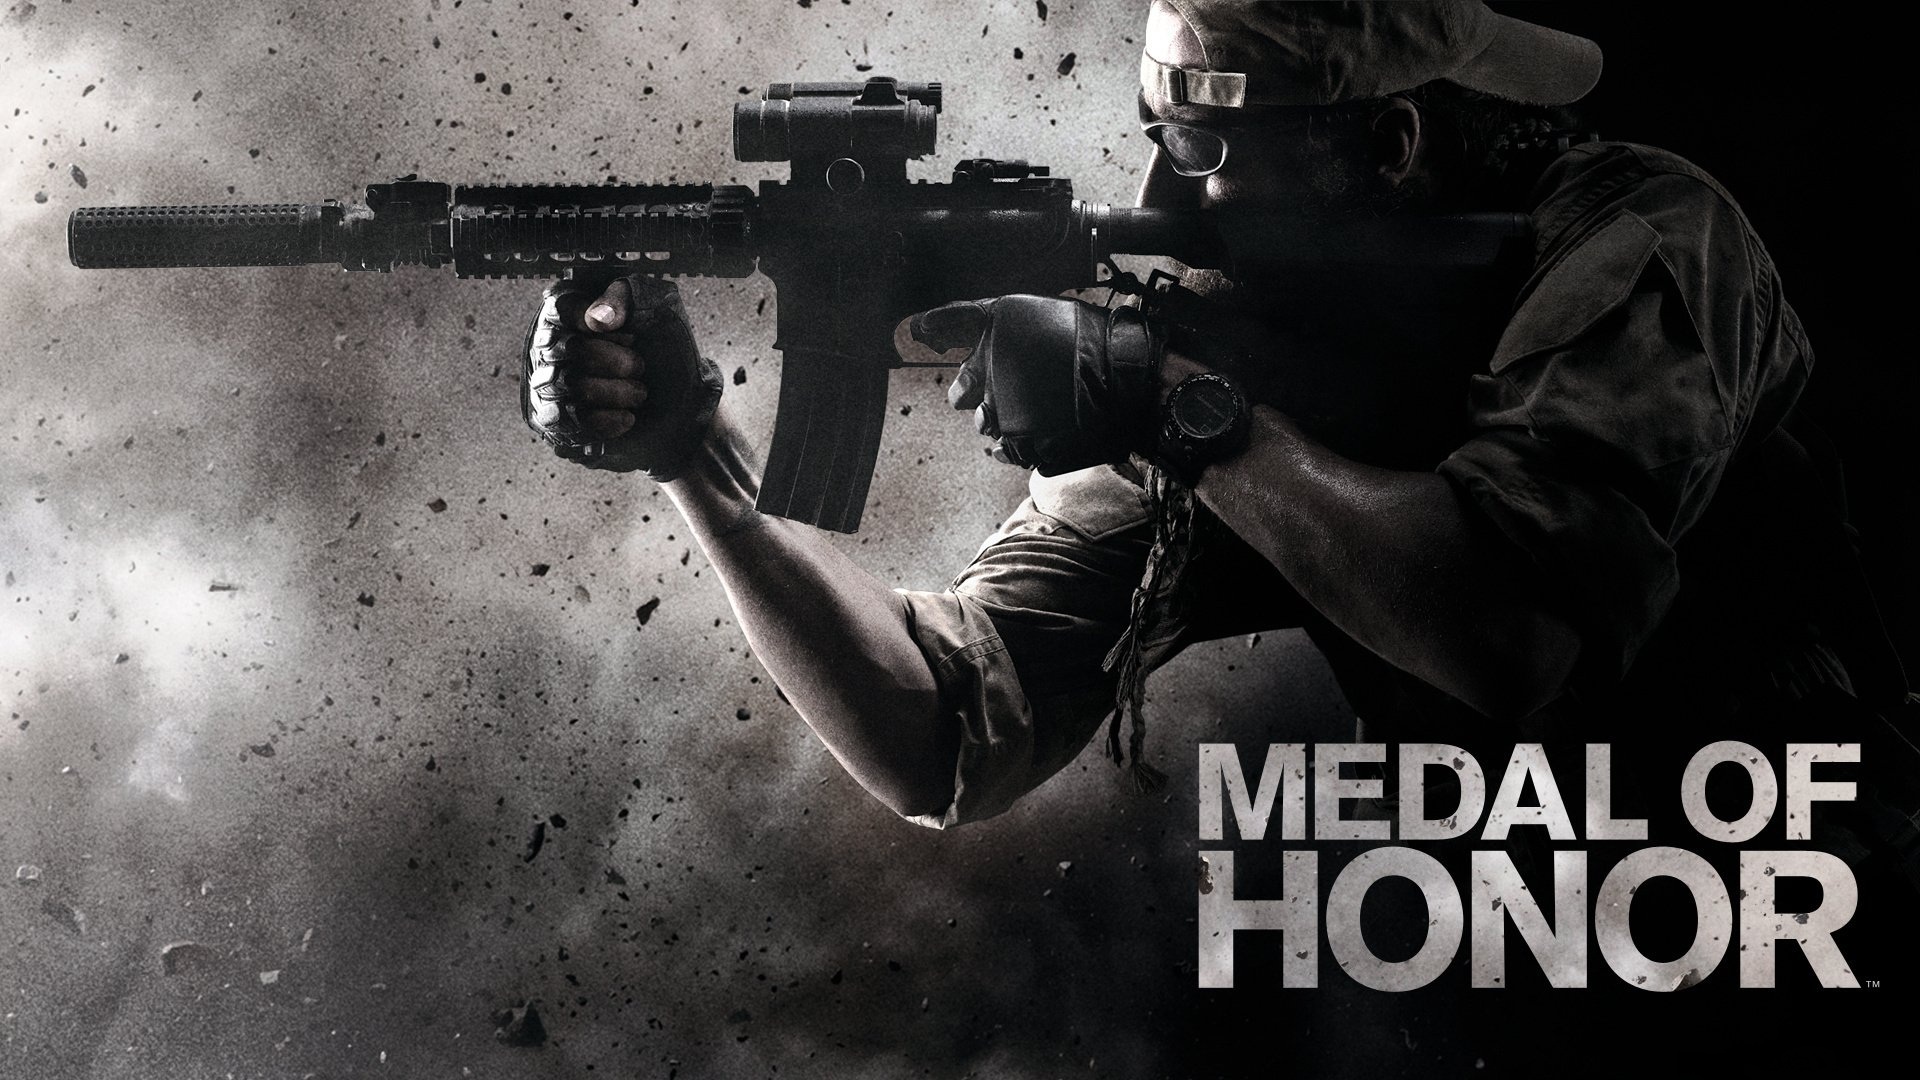 Video Game Medal of Honor: Frontline HD Wallpaper | Background Image